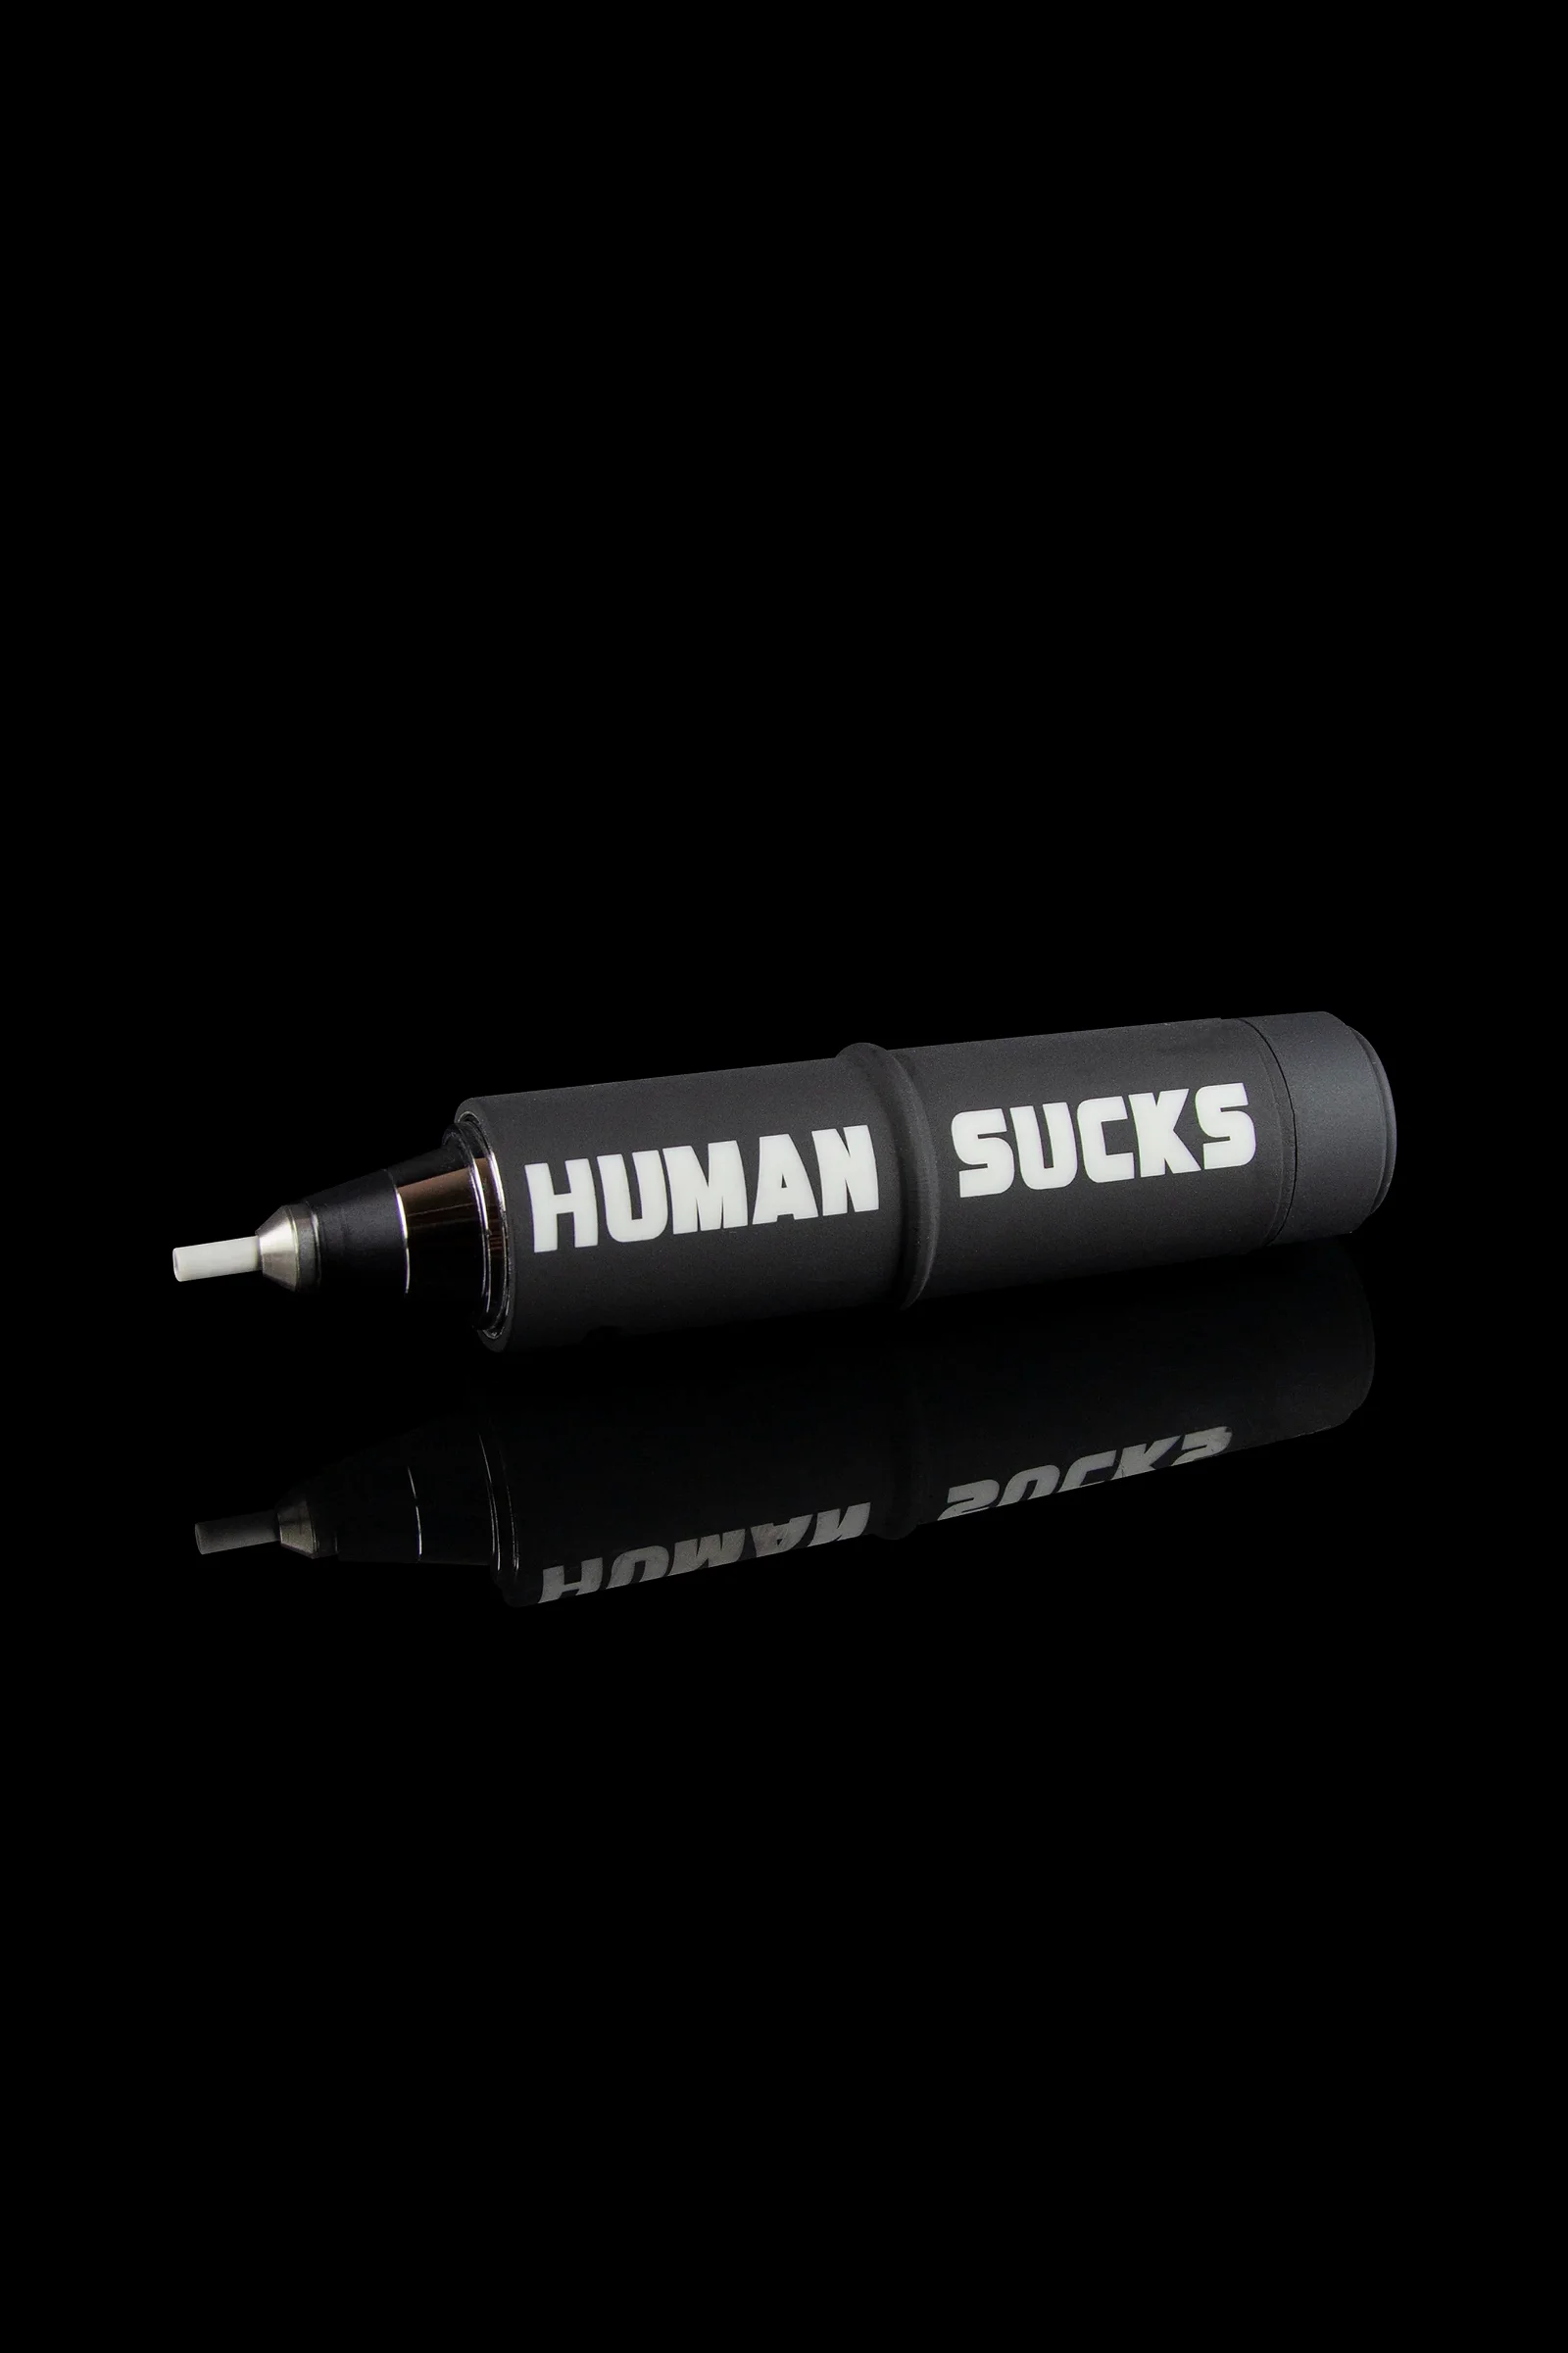 Image of Human Sucks STINGER 2 Electric Nectar Collector